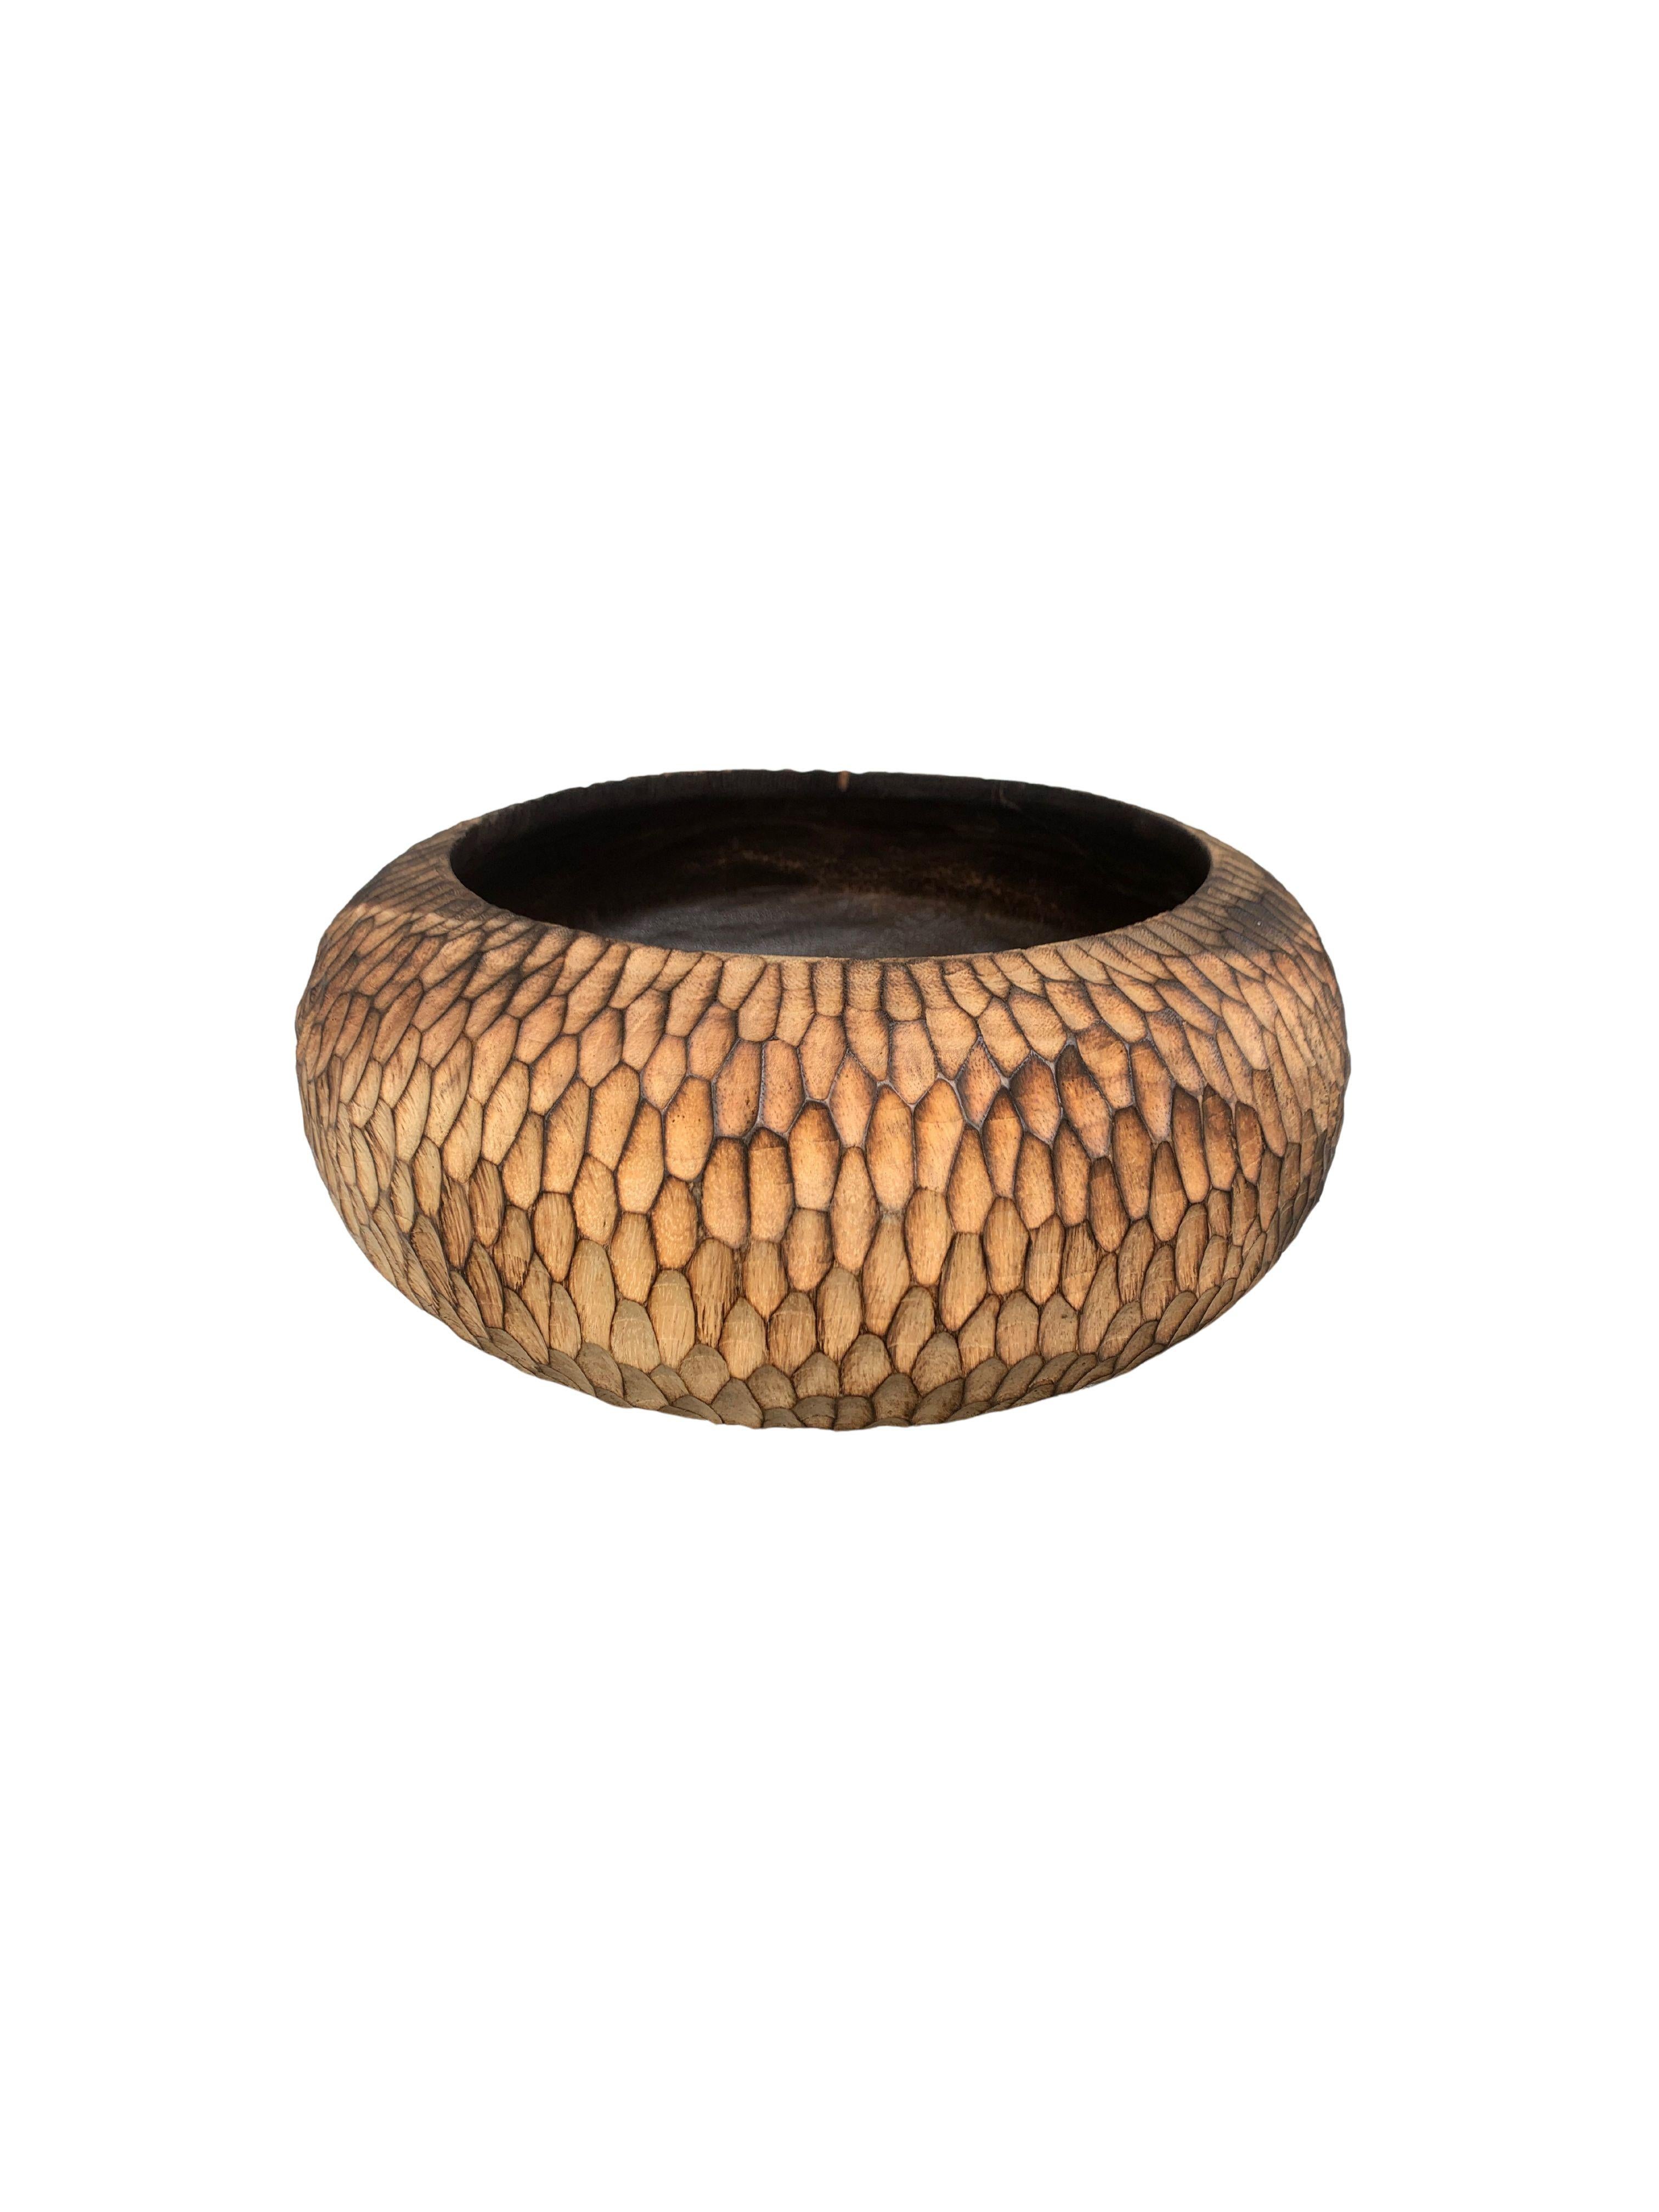 A hand-crafted mango wood bowl. The bowl was cut from a much larger slab of mango wood and features a hand-hewn texture on its sides. This bowl was burnt three times to achieve its rich black colour present in its basin. The exterior was then slowly